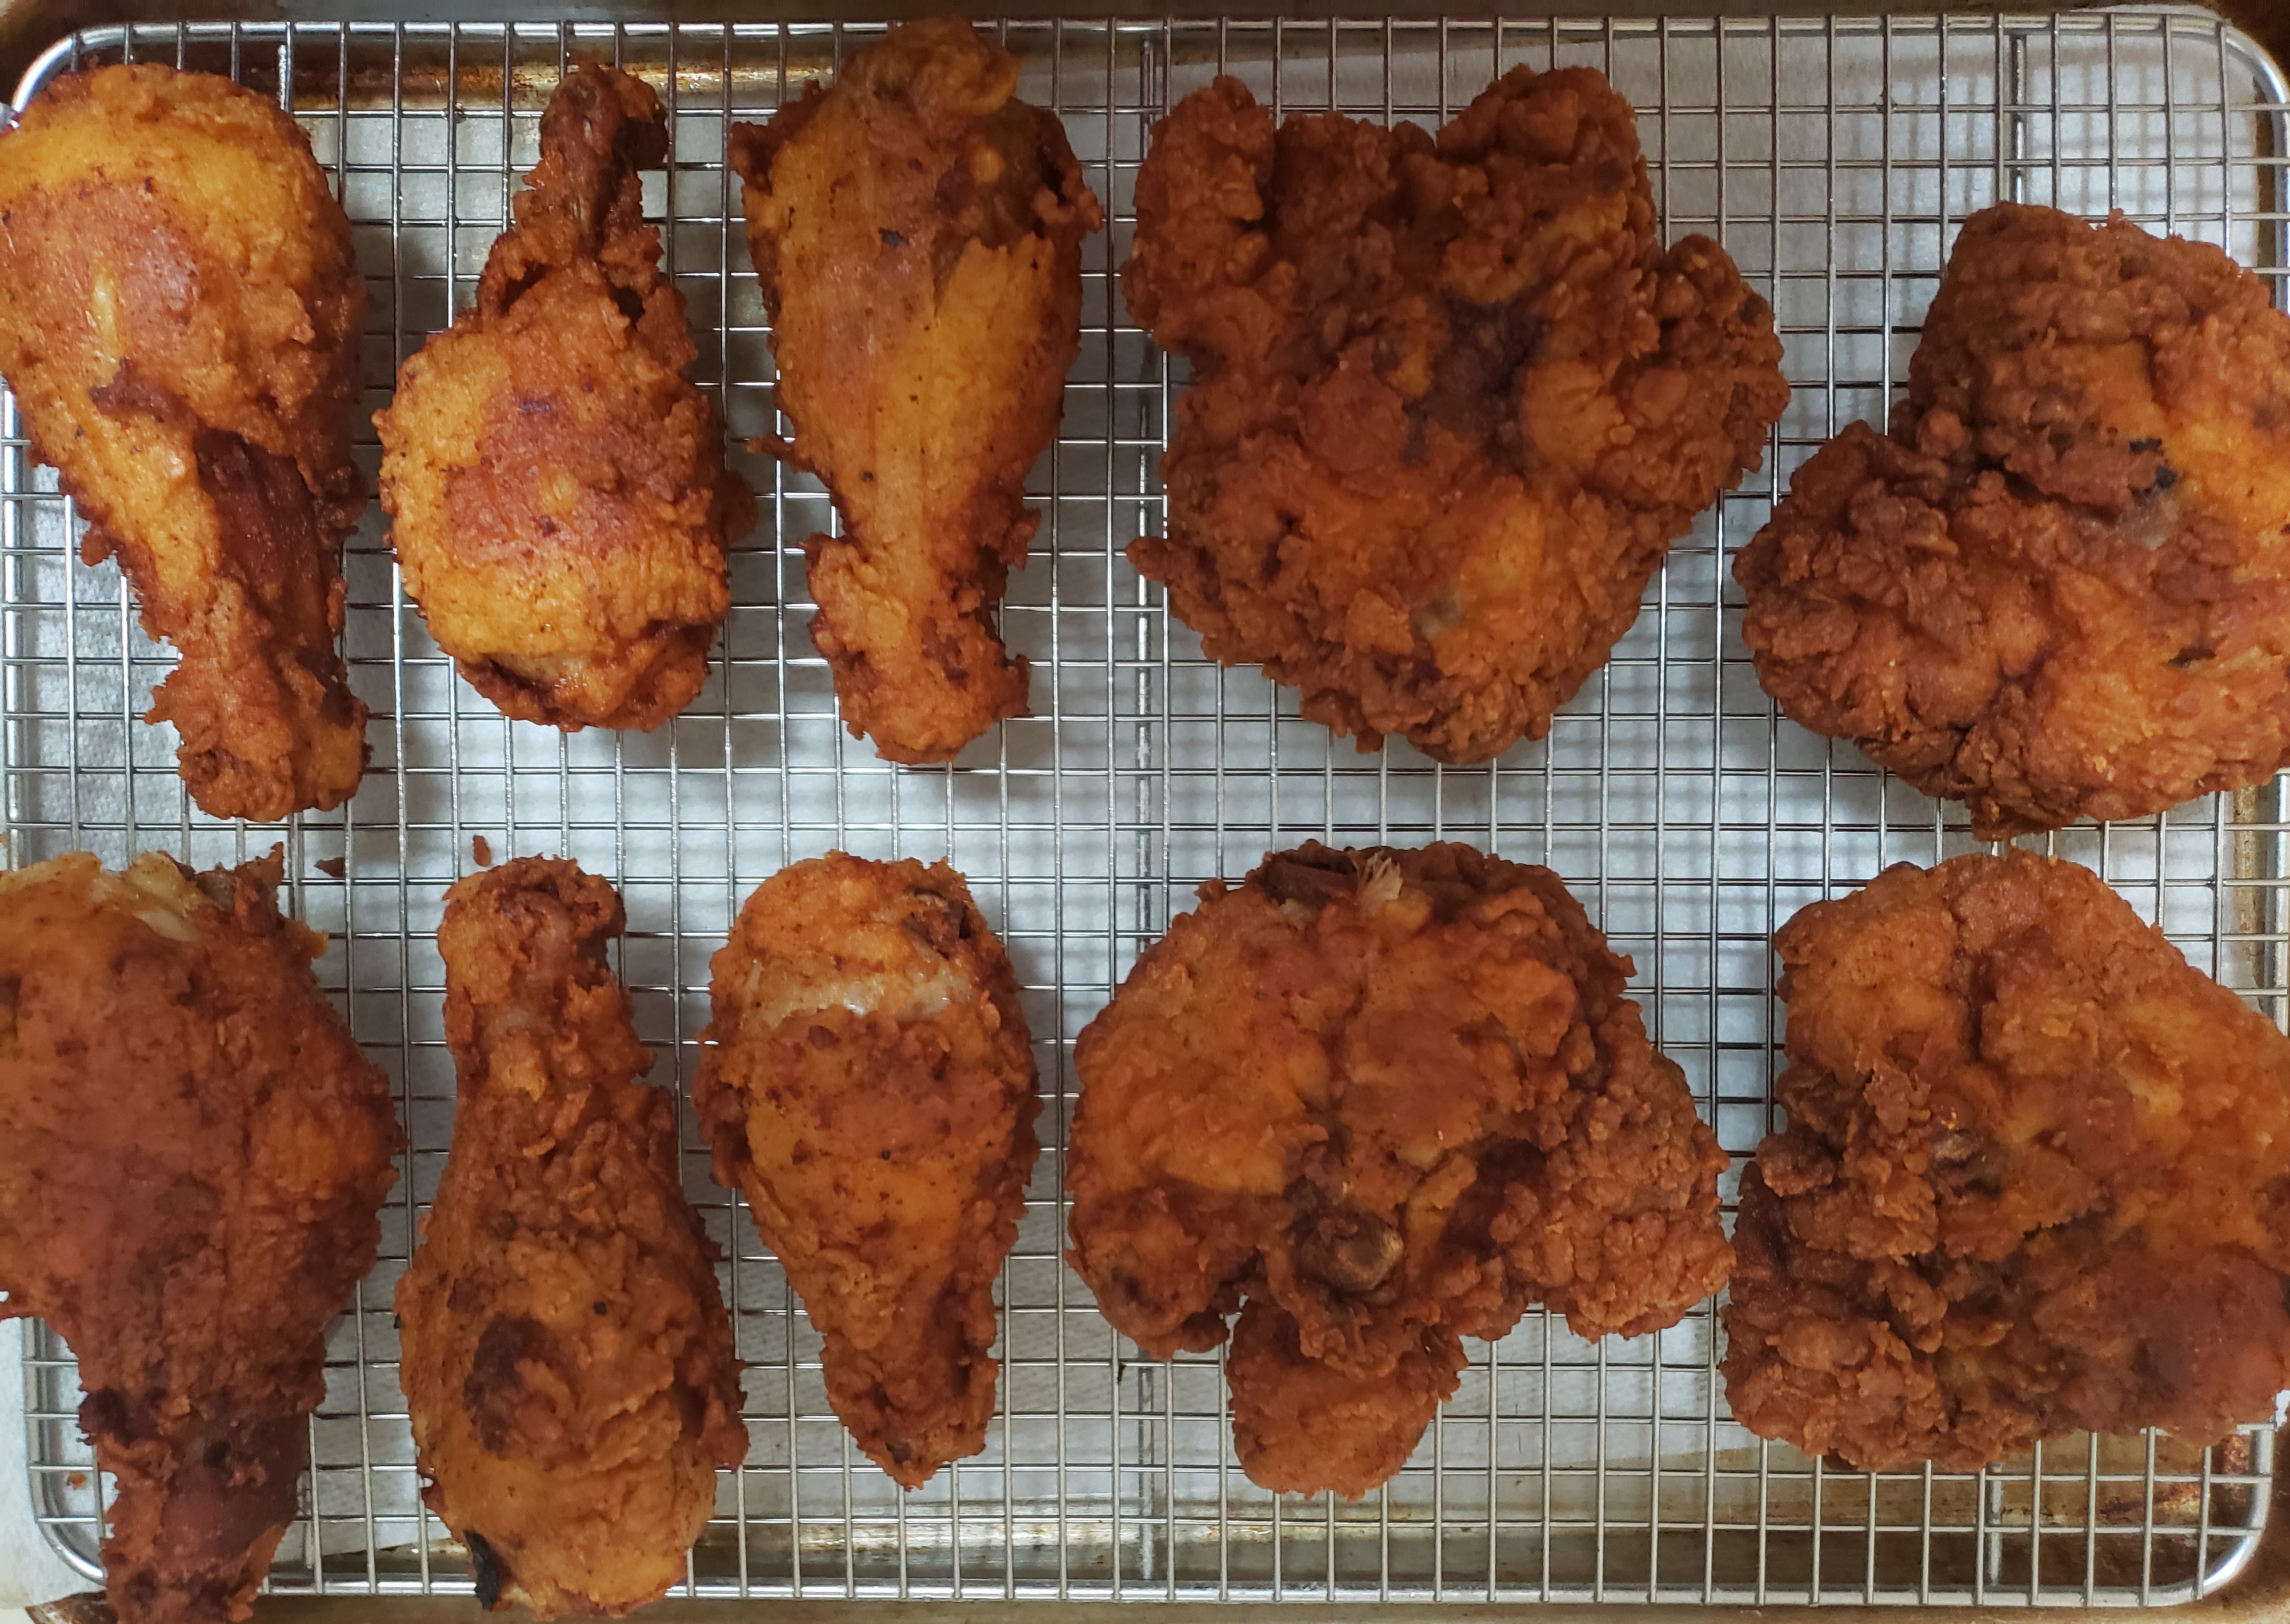 Can You Substitute Heavy Cream For Buttermilk For Fried Chicken Buttermilk Fried Chicken My Dragonfly Cafe